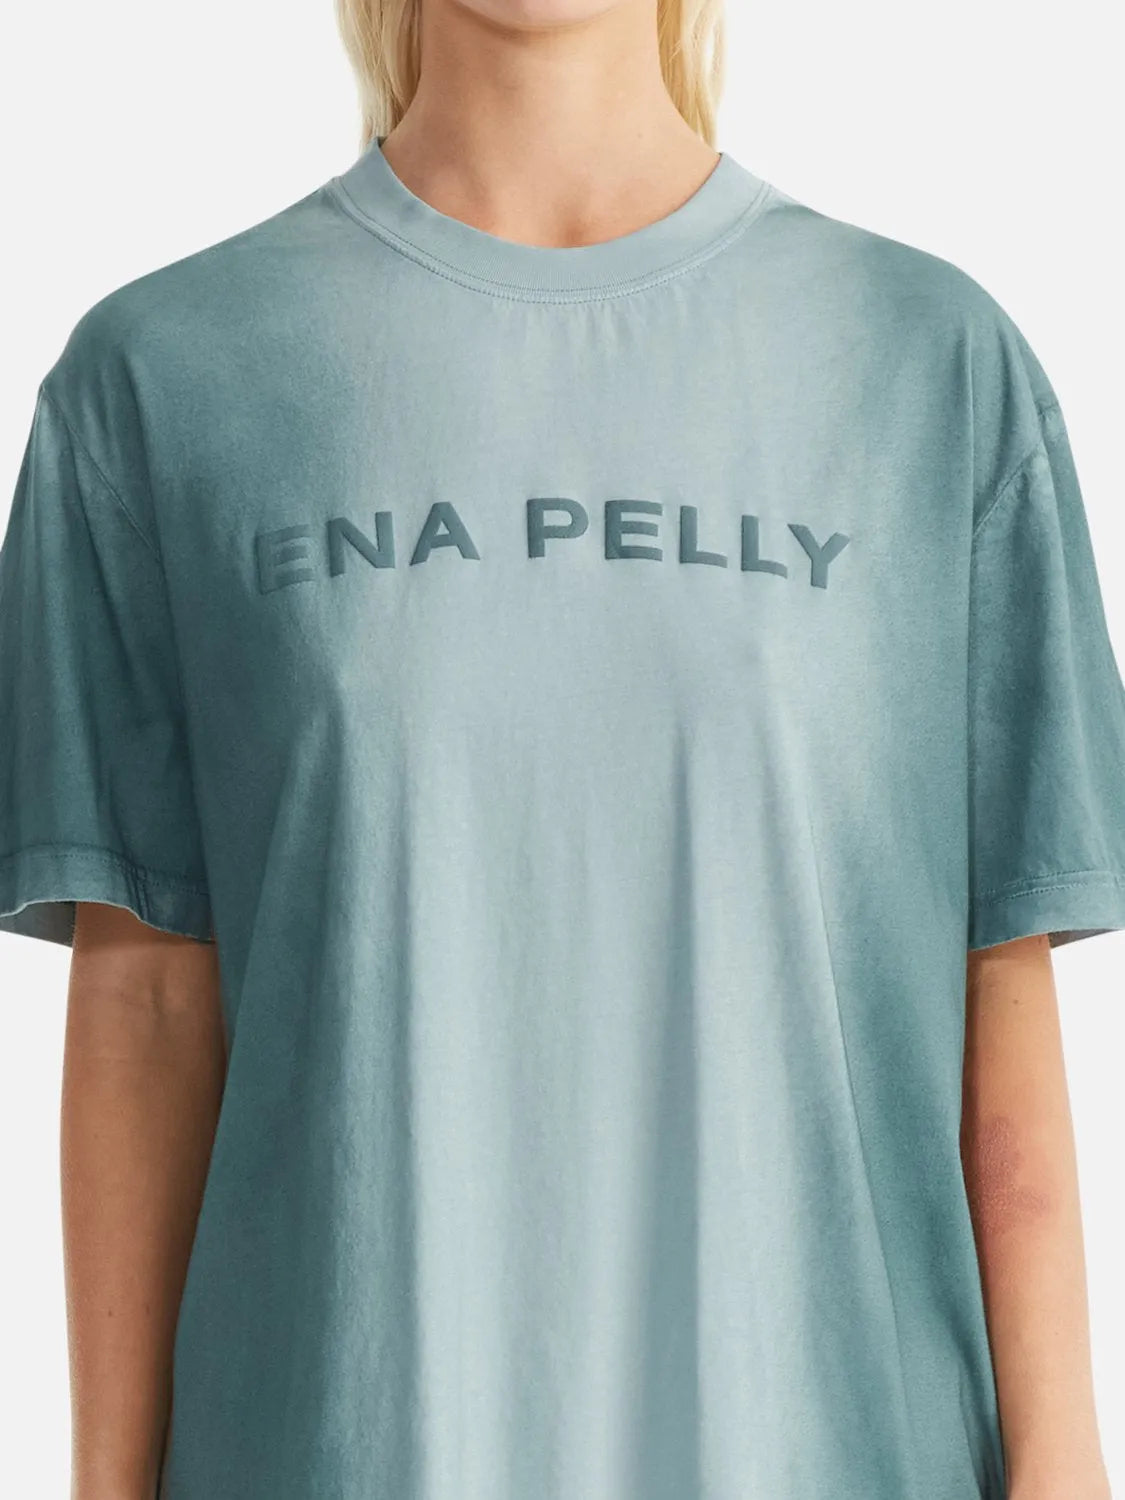 Ena Pelly | Jessie Oversized Tee Ombre Mist/Teal